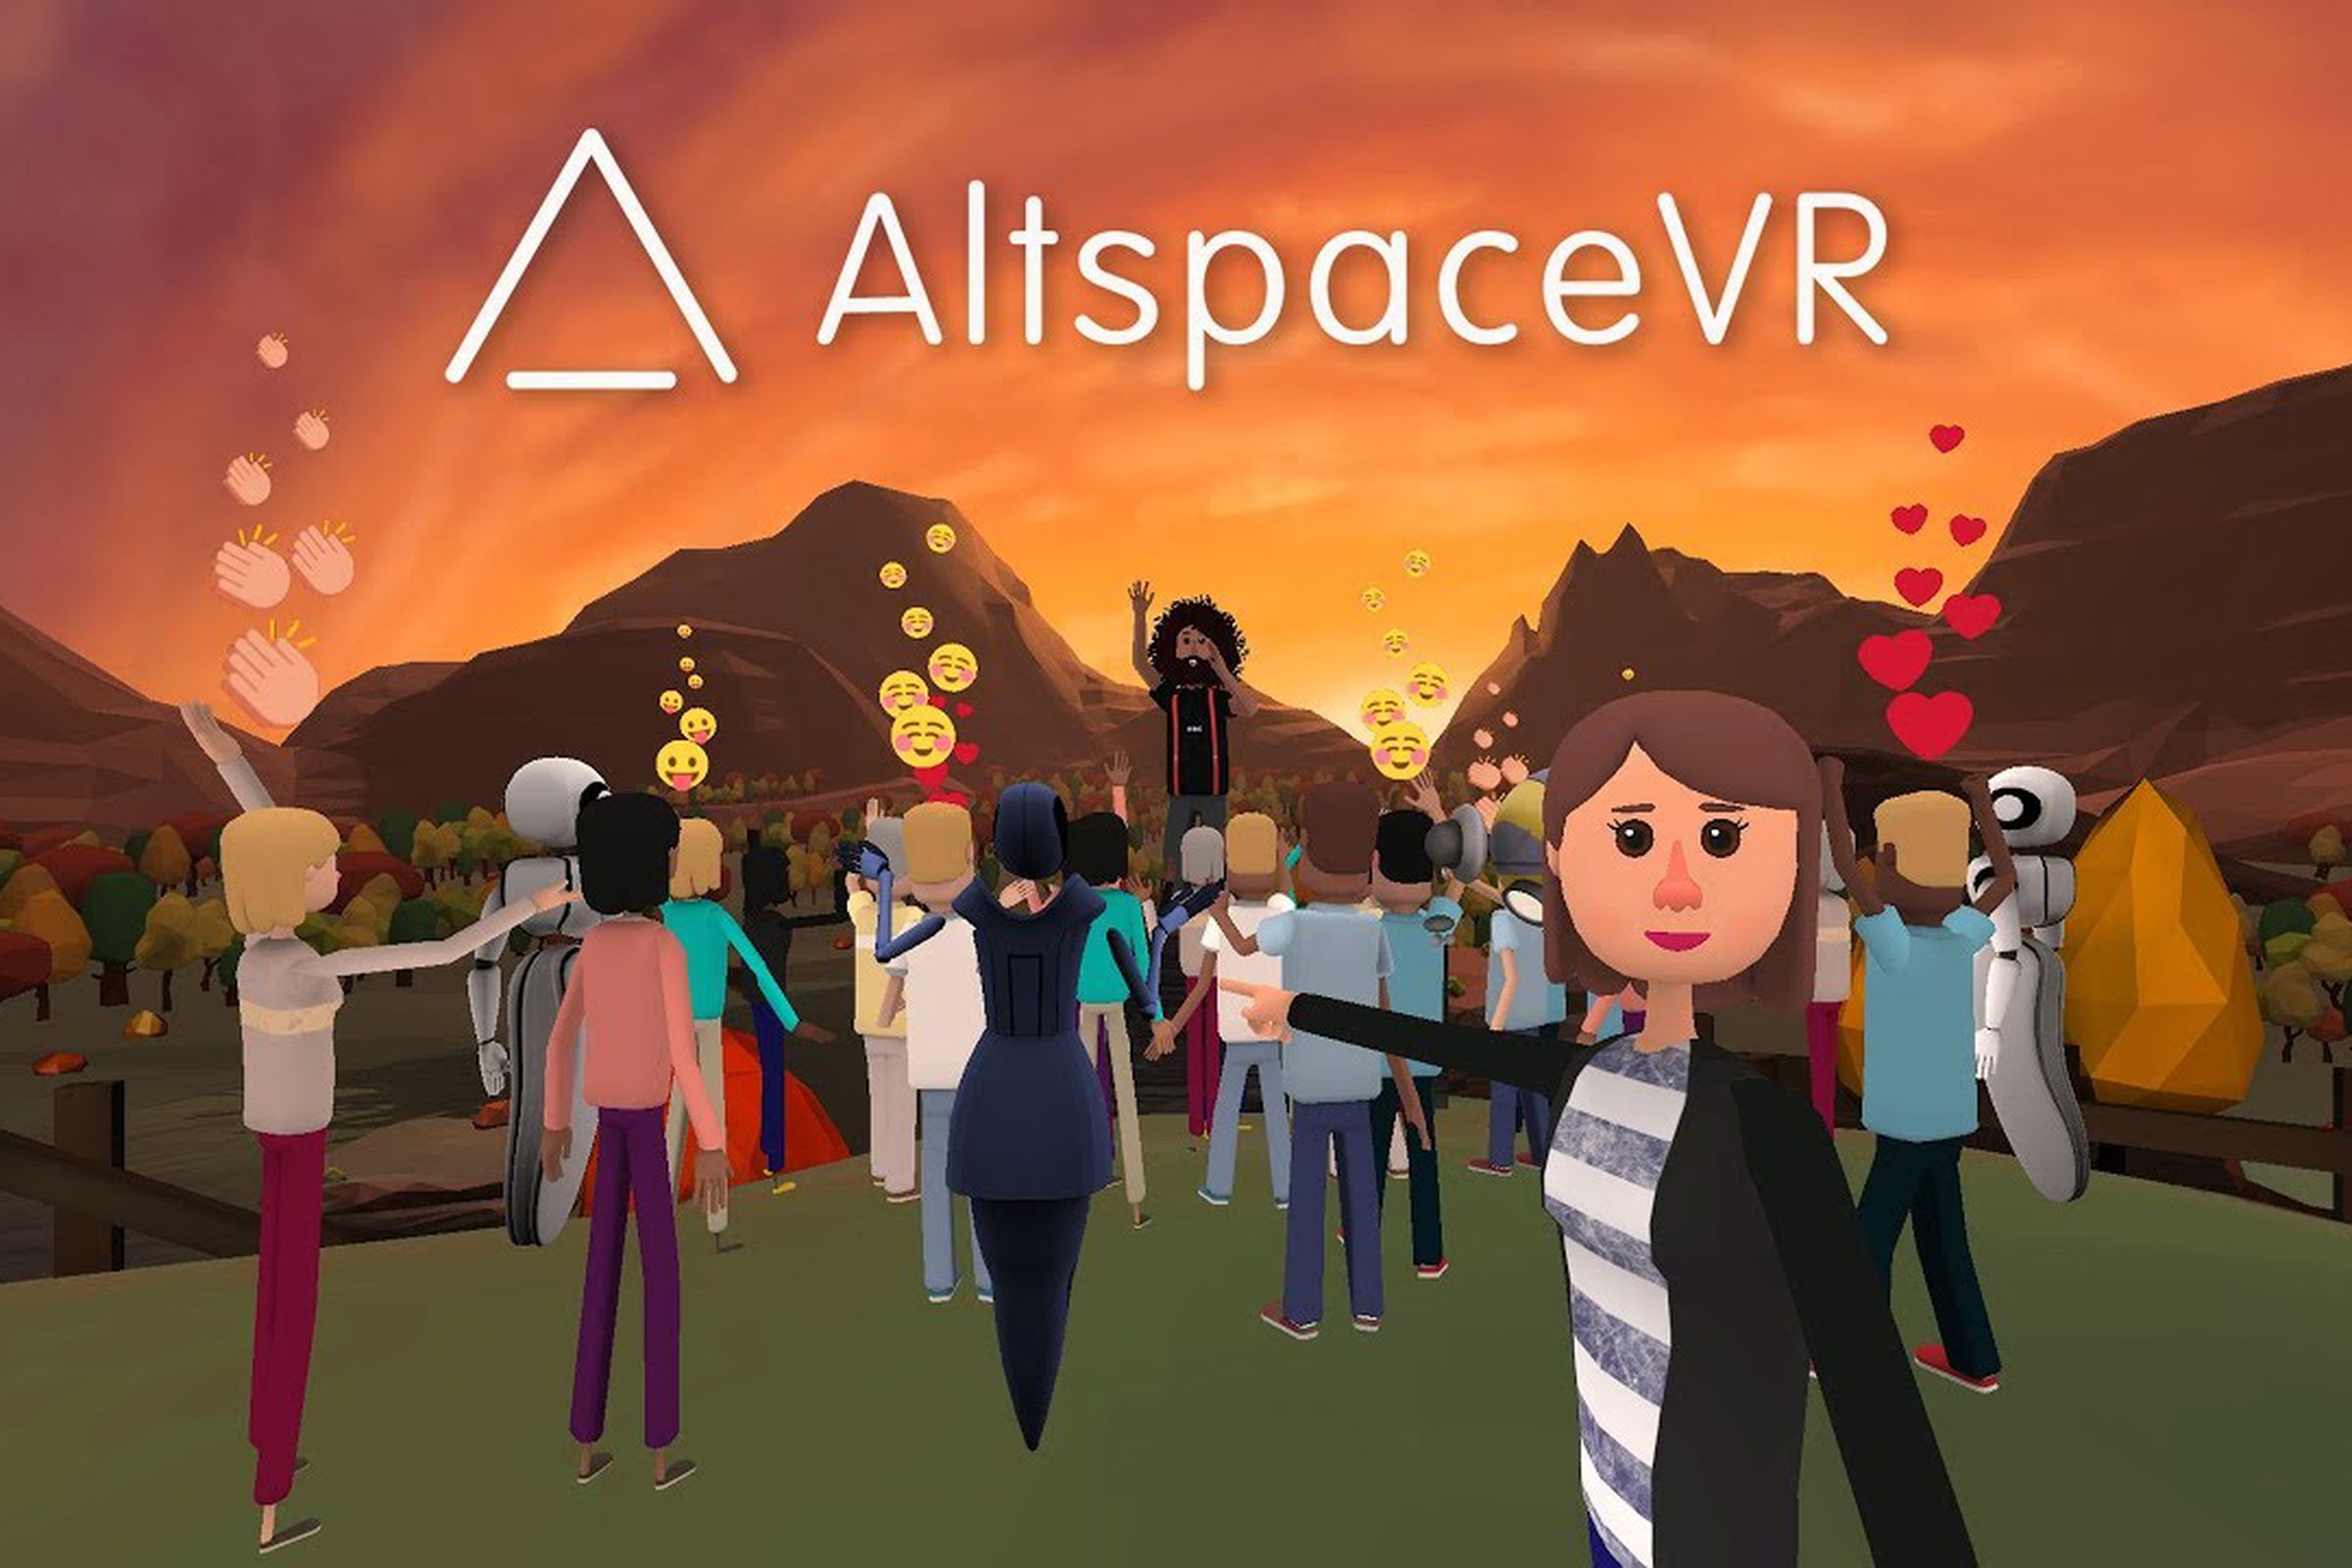 Microsoft acquired AltspaceVR in 2017.